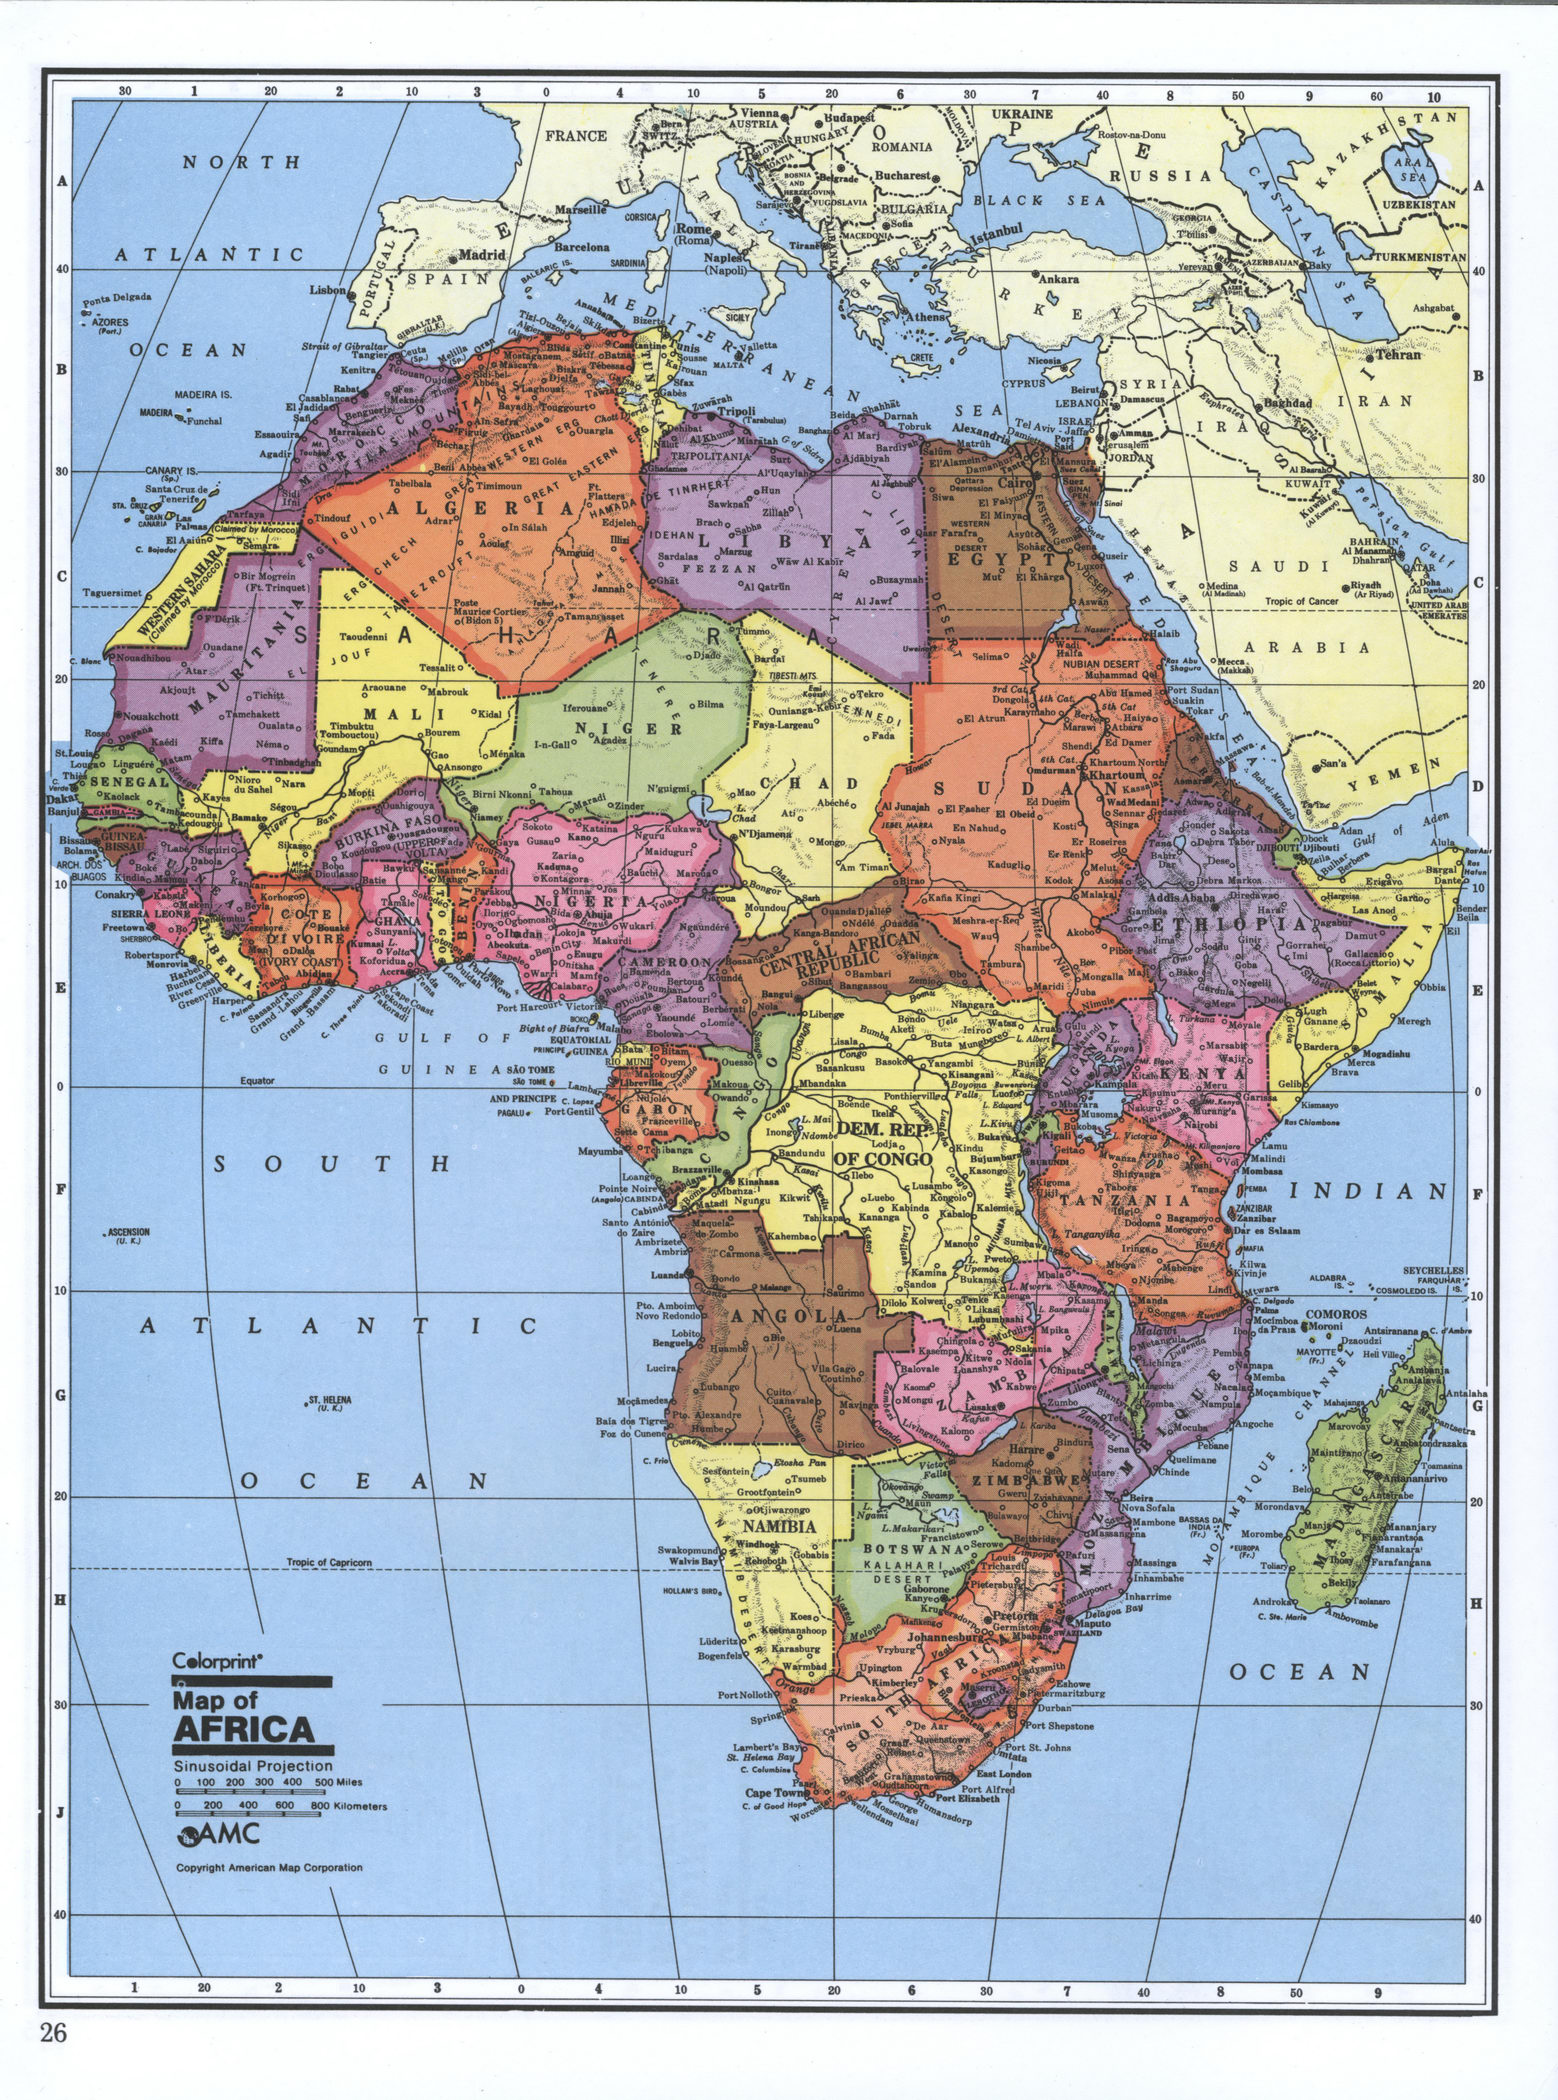 Maps Of Africa And African Countries Political Maps Road And Sexiz Pix 6045